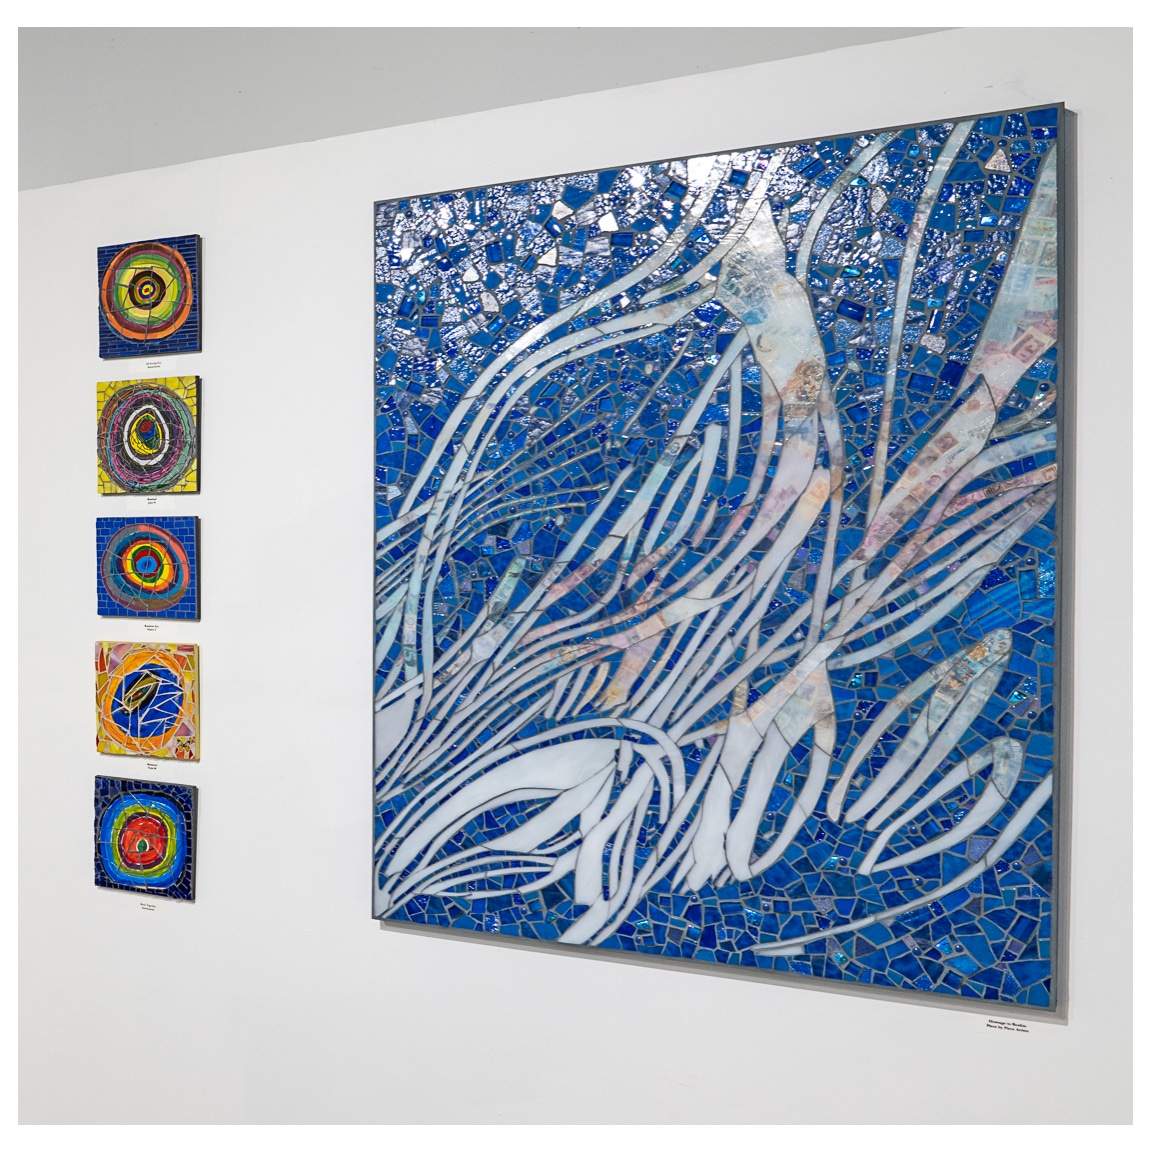 Extra large blue and white mosaic wall art Laura Letchinger and Piece by Piece HOMAGE TO REALIZE